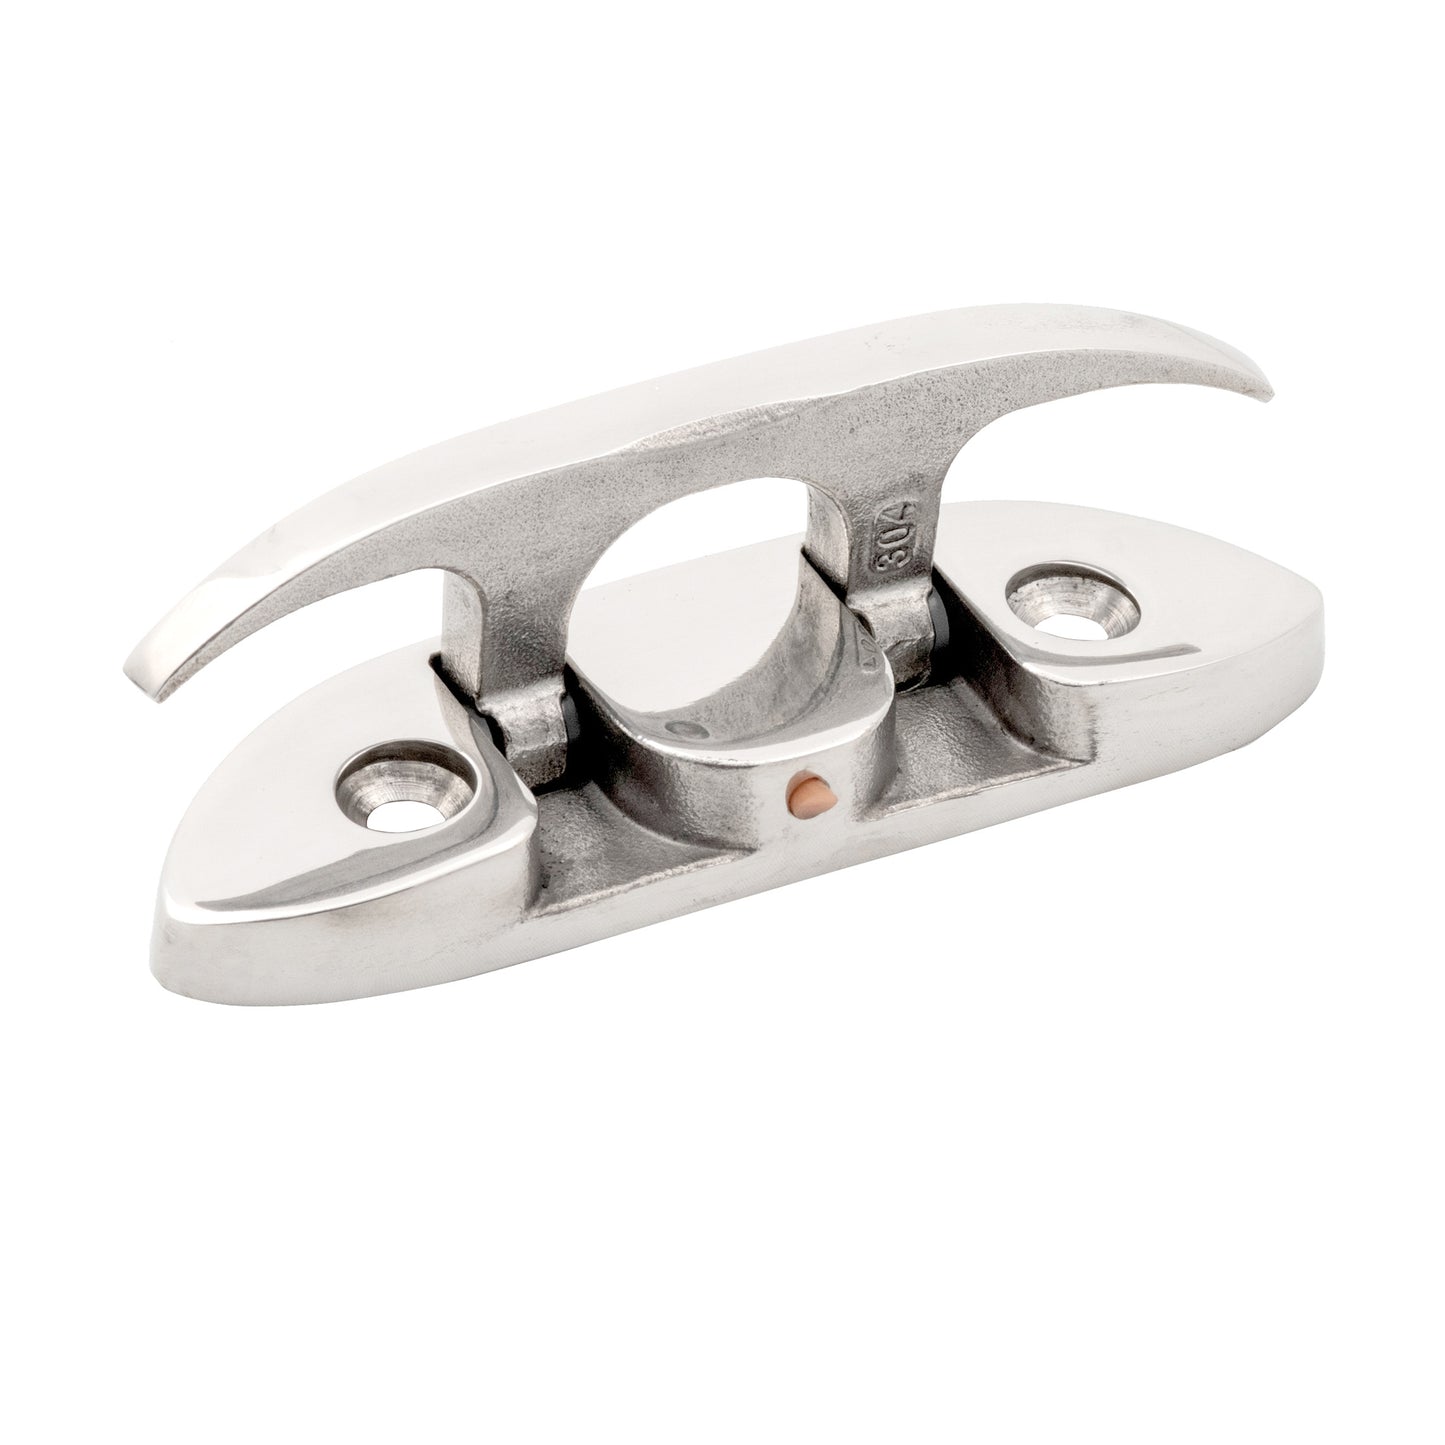 4-9/16" Stainless Steel Folding Cleat